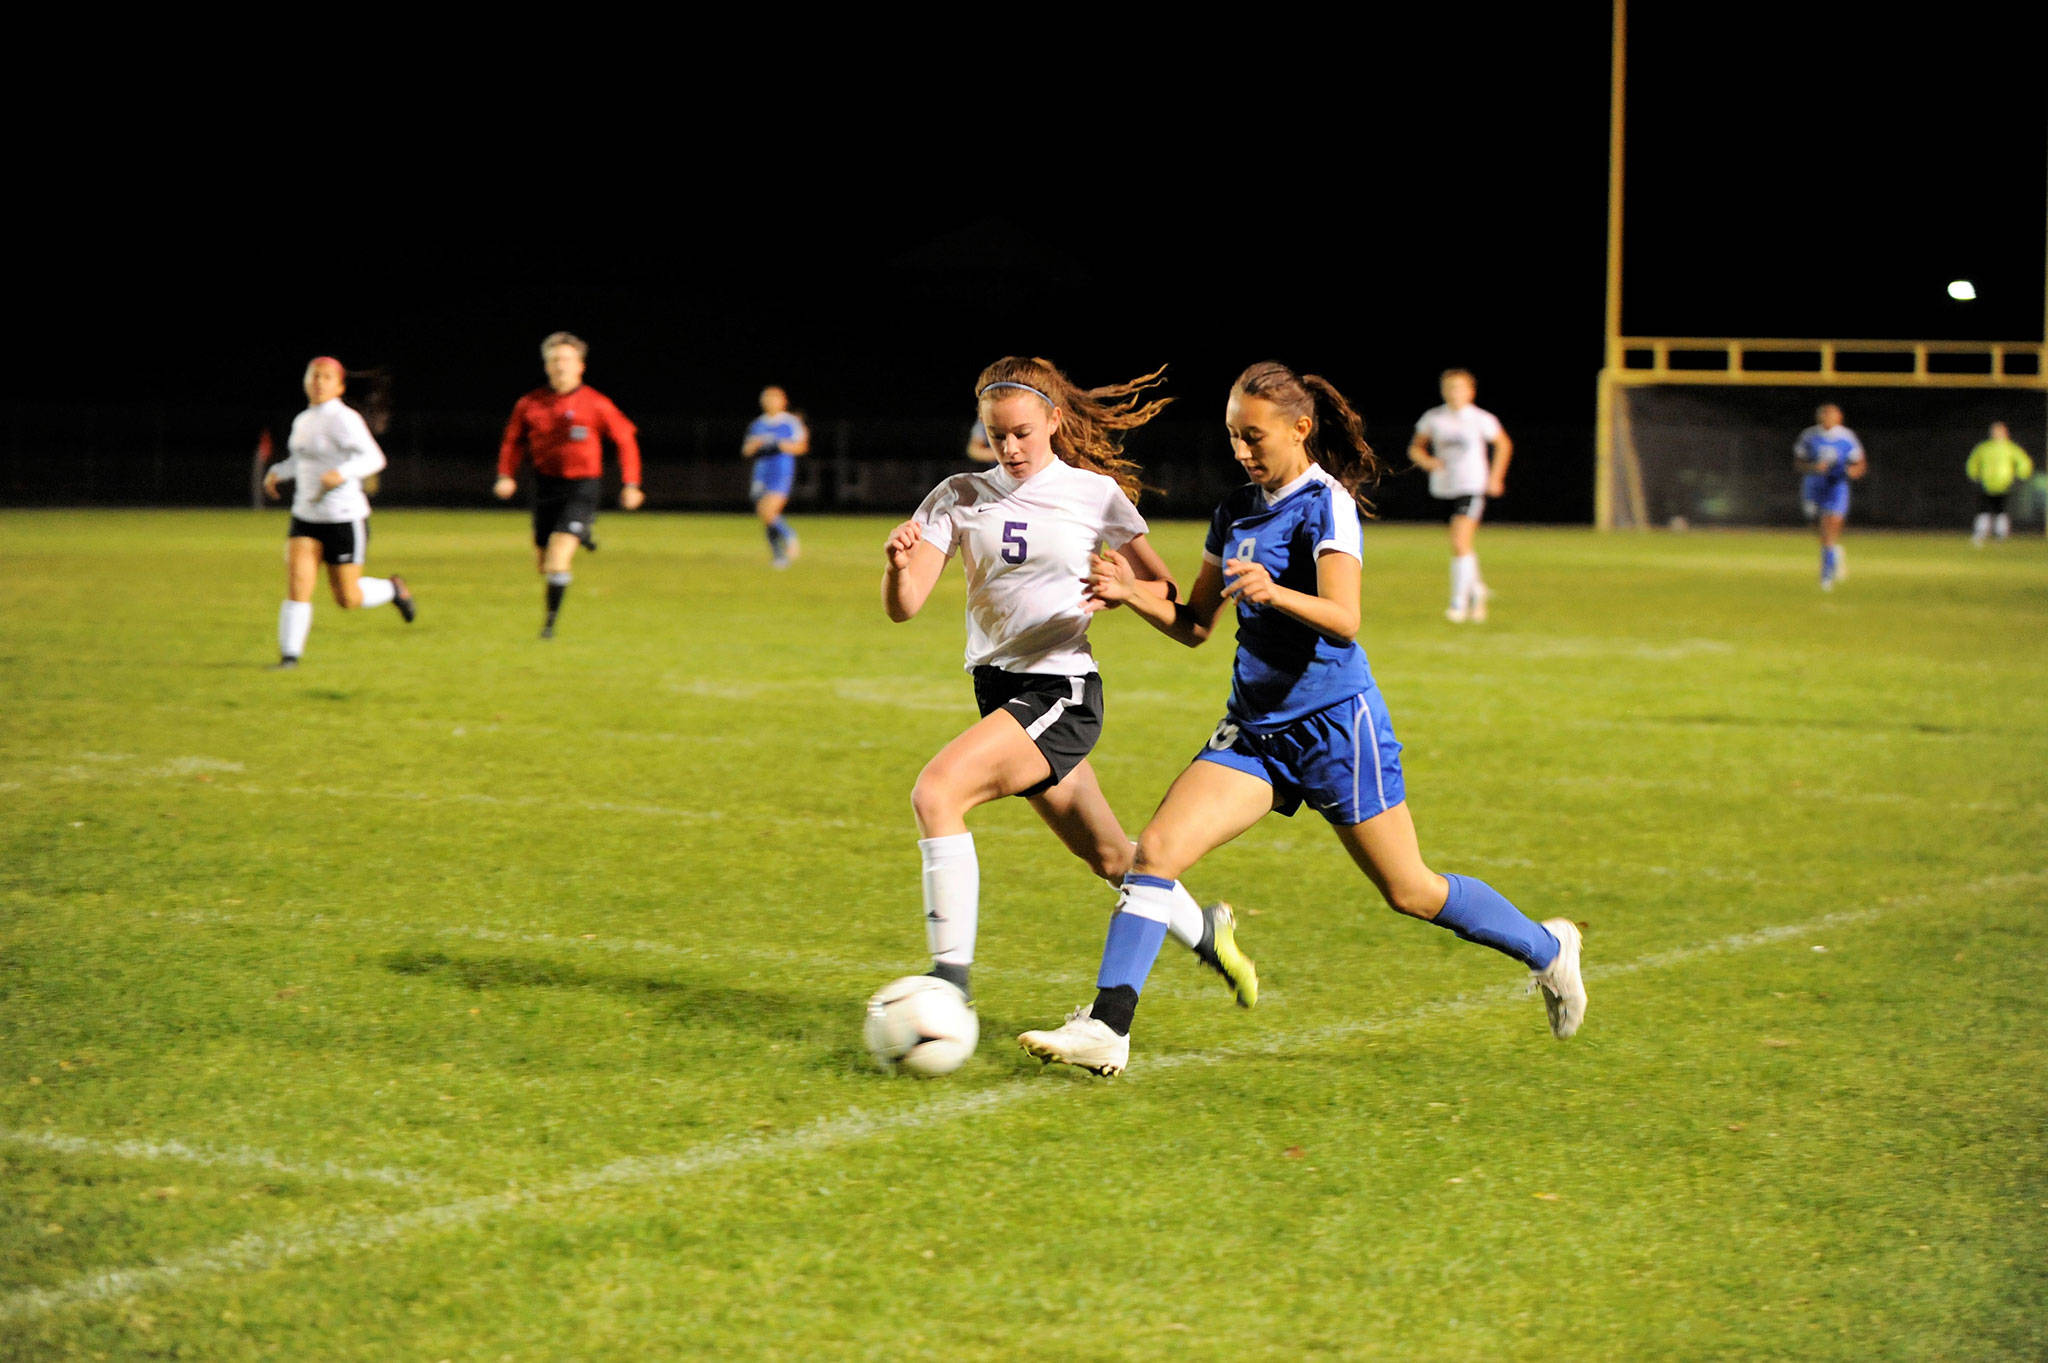 Sequim’s Mary McAleer looks to take the ball away from Bremerton’s Abigail Dubeau on Oct. 23. The Wolves went on to win 1-0 and finish their regular season tonight, Oct. 25, in Kingston. Sequim Gazette photo by Matthew Nash